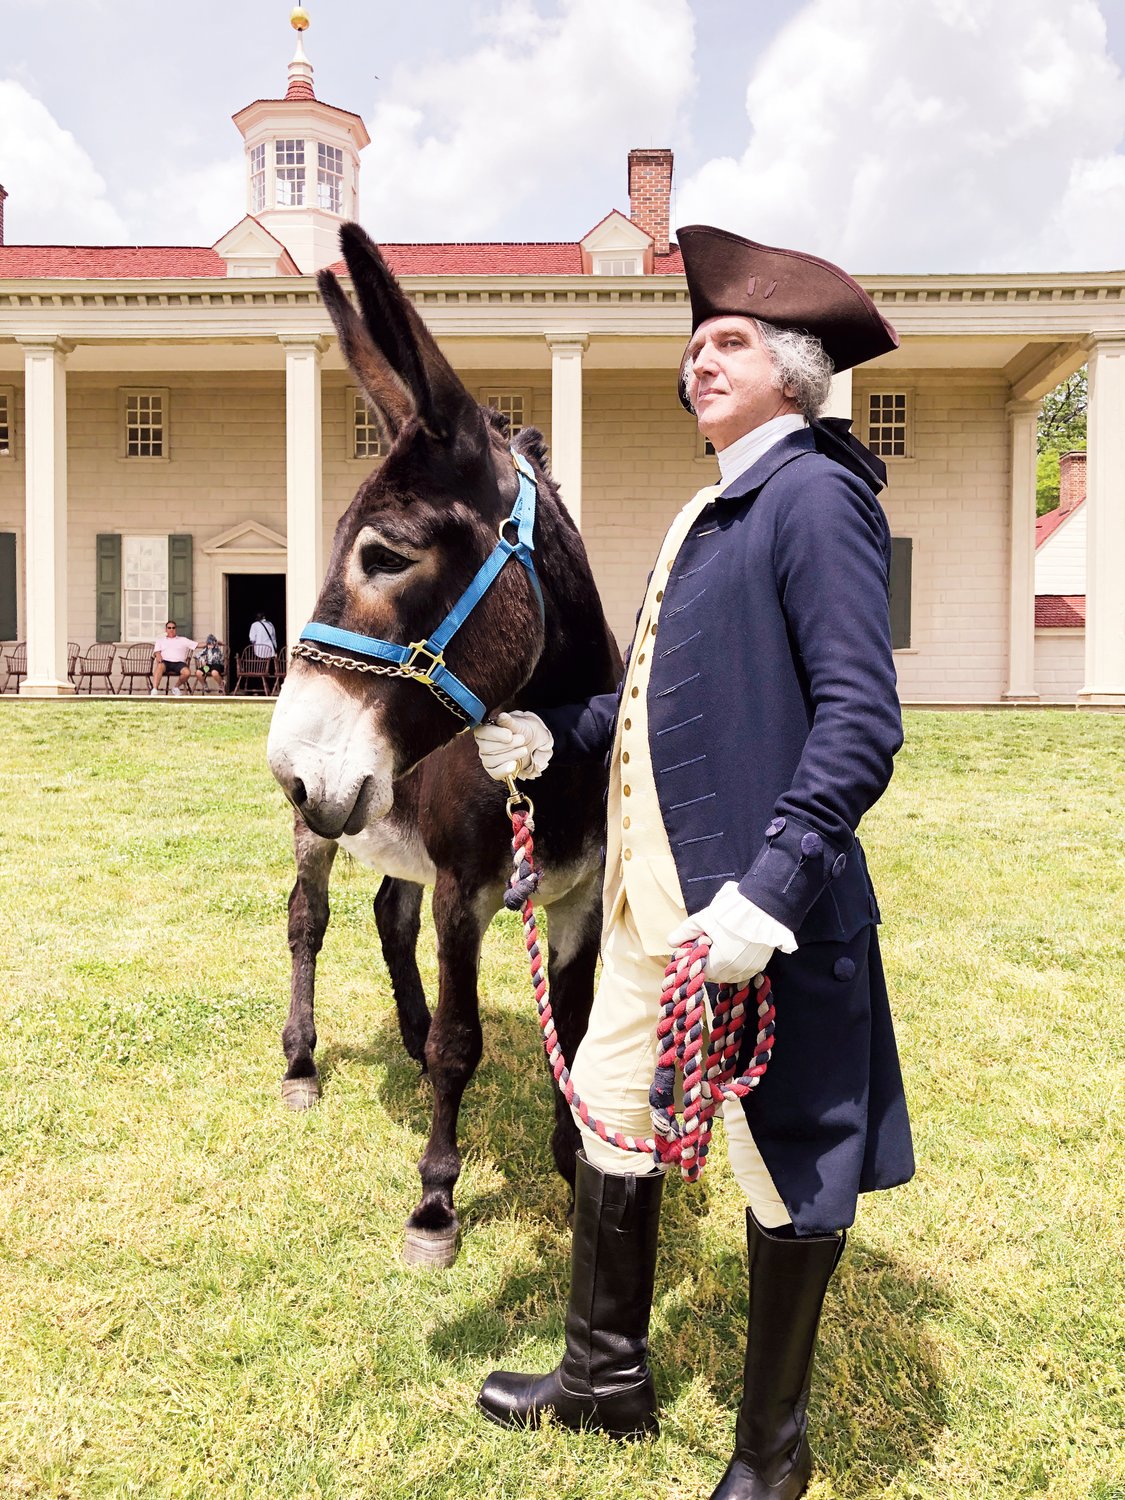 Actor Daniel Shippey portrays President George Washington at the stamp ceremony at Mount Vernon. Washington signed legislation that created the USPS and was known for his advocacy of mules.